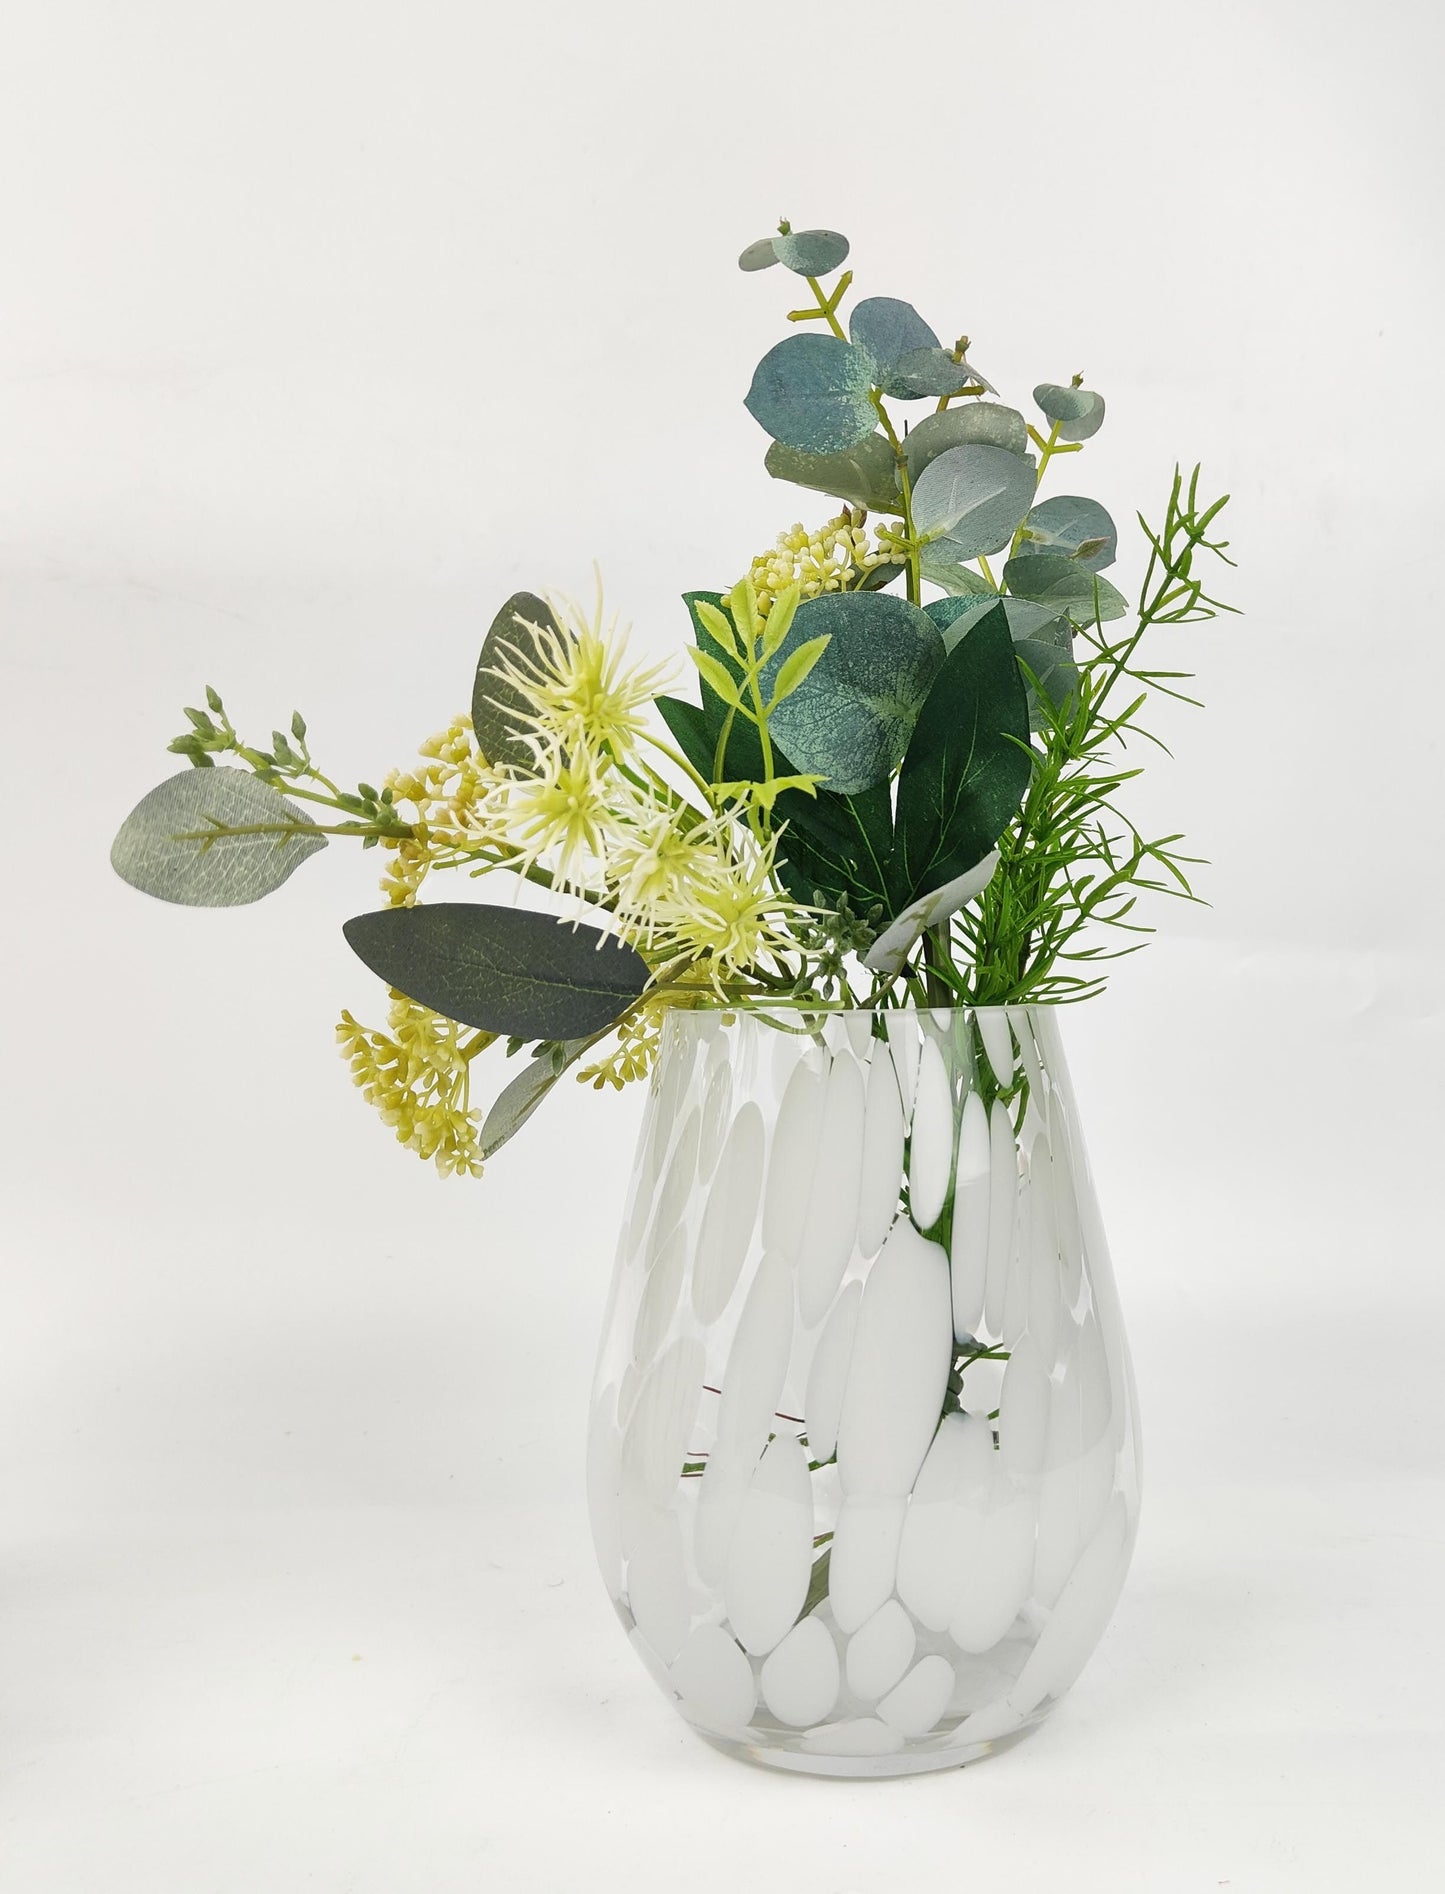 Tommy Speckle Vases 17cm